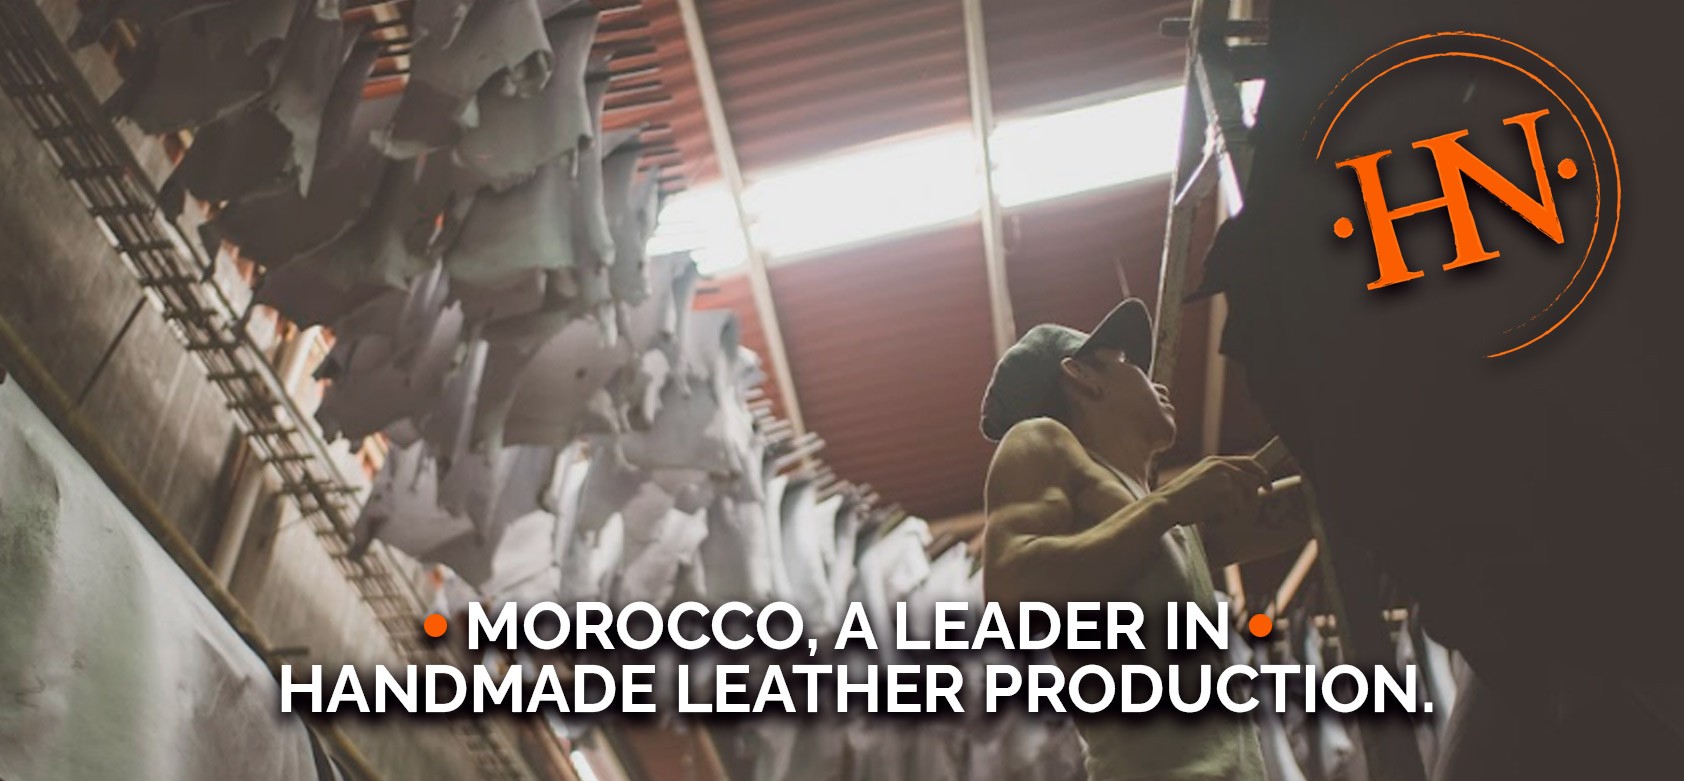 Morocco,-a-Leader-in-Handmade-Leather-Production.